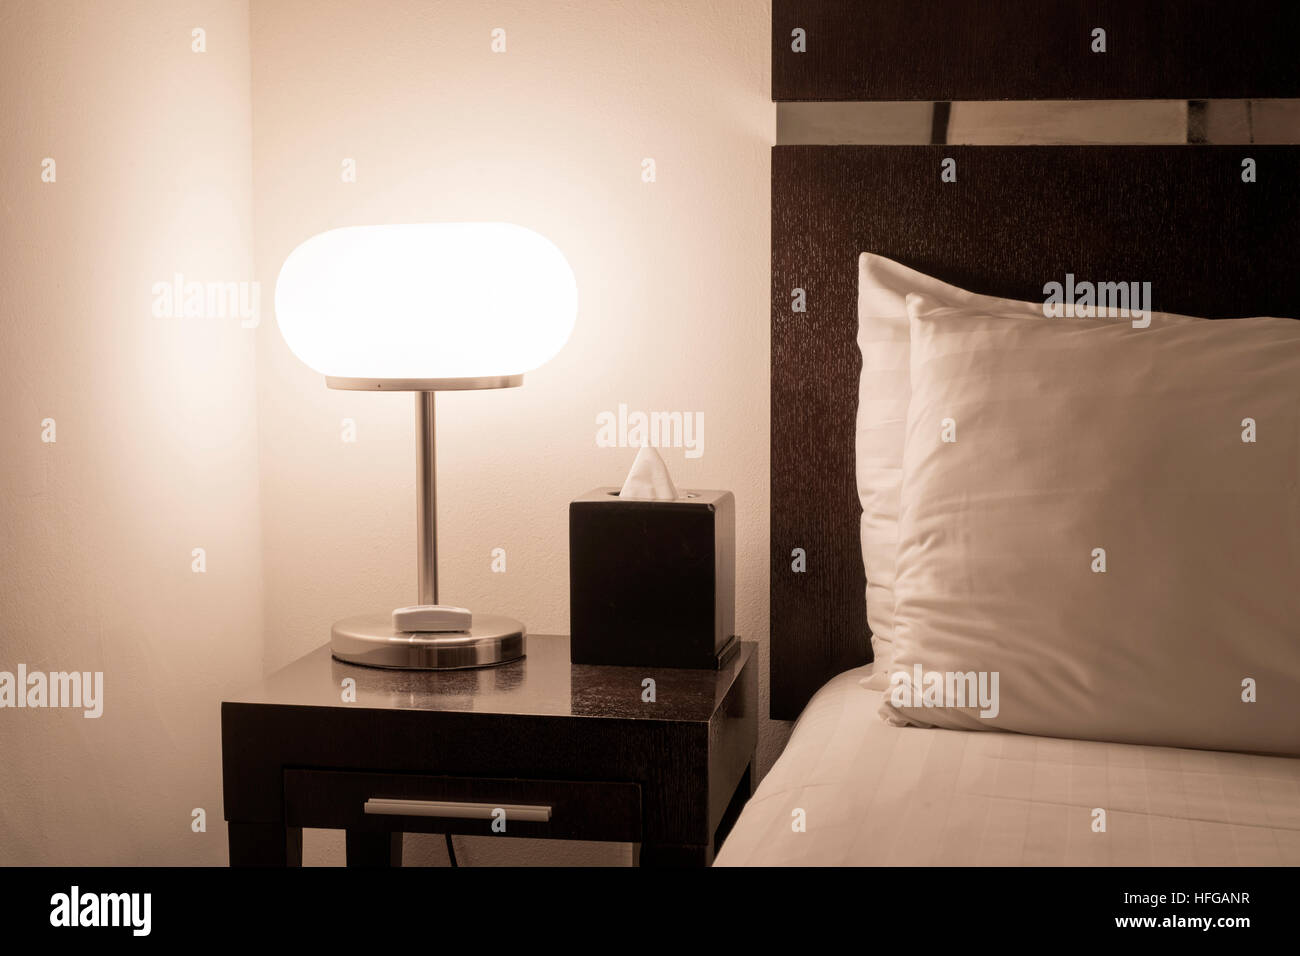 hotel room interior with illuminated bed light on wooden table Stock Photo